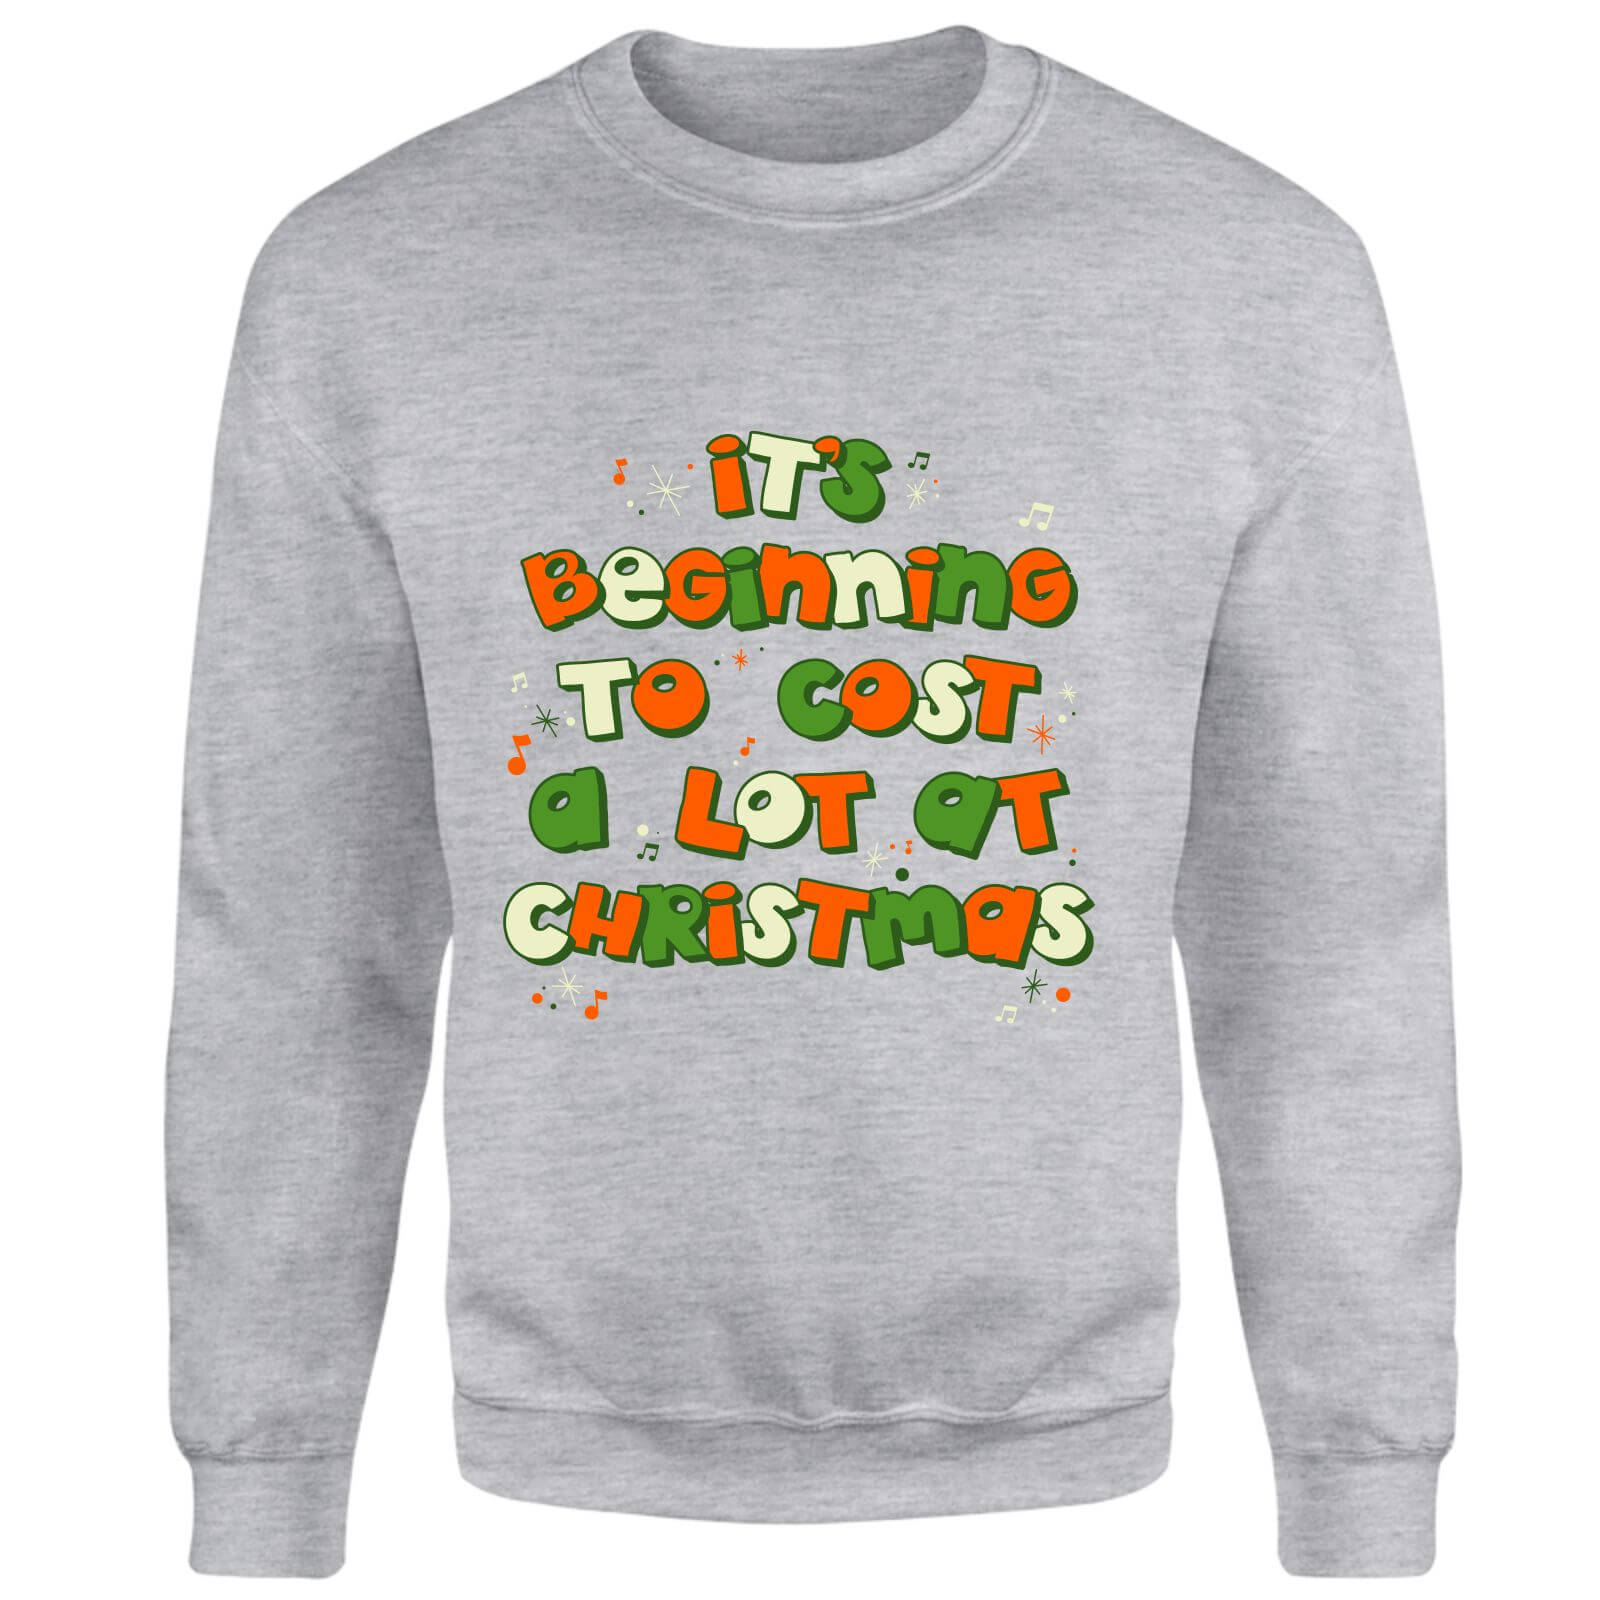 It's Beginning To Cost A Lot At Christmas Sweatshirt - Grey - XS - Grey